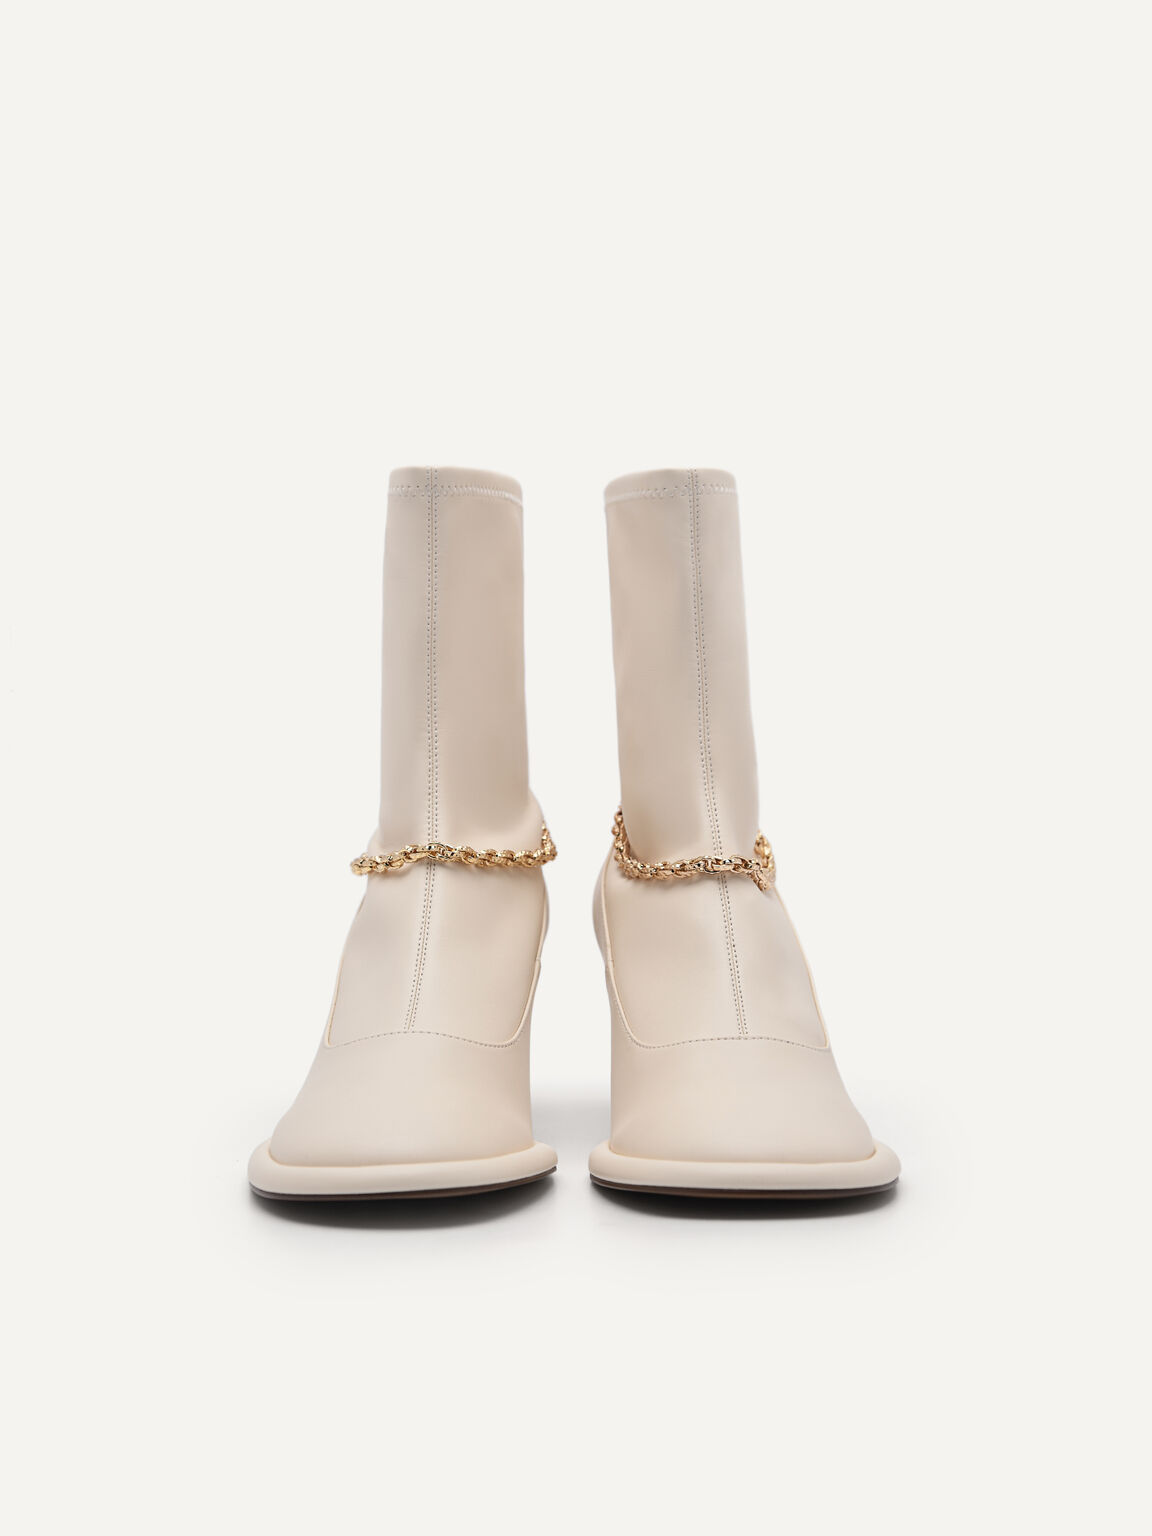 Sistrah Ankle Boots, Beige